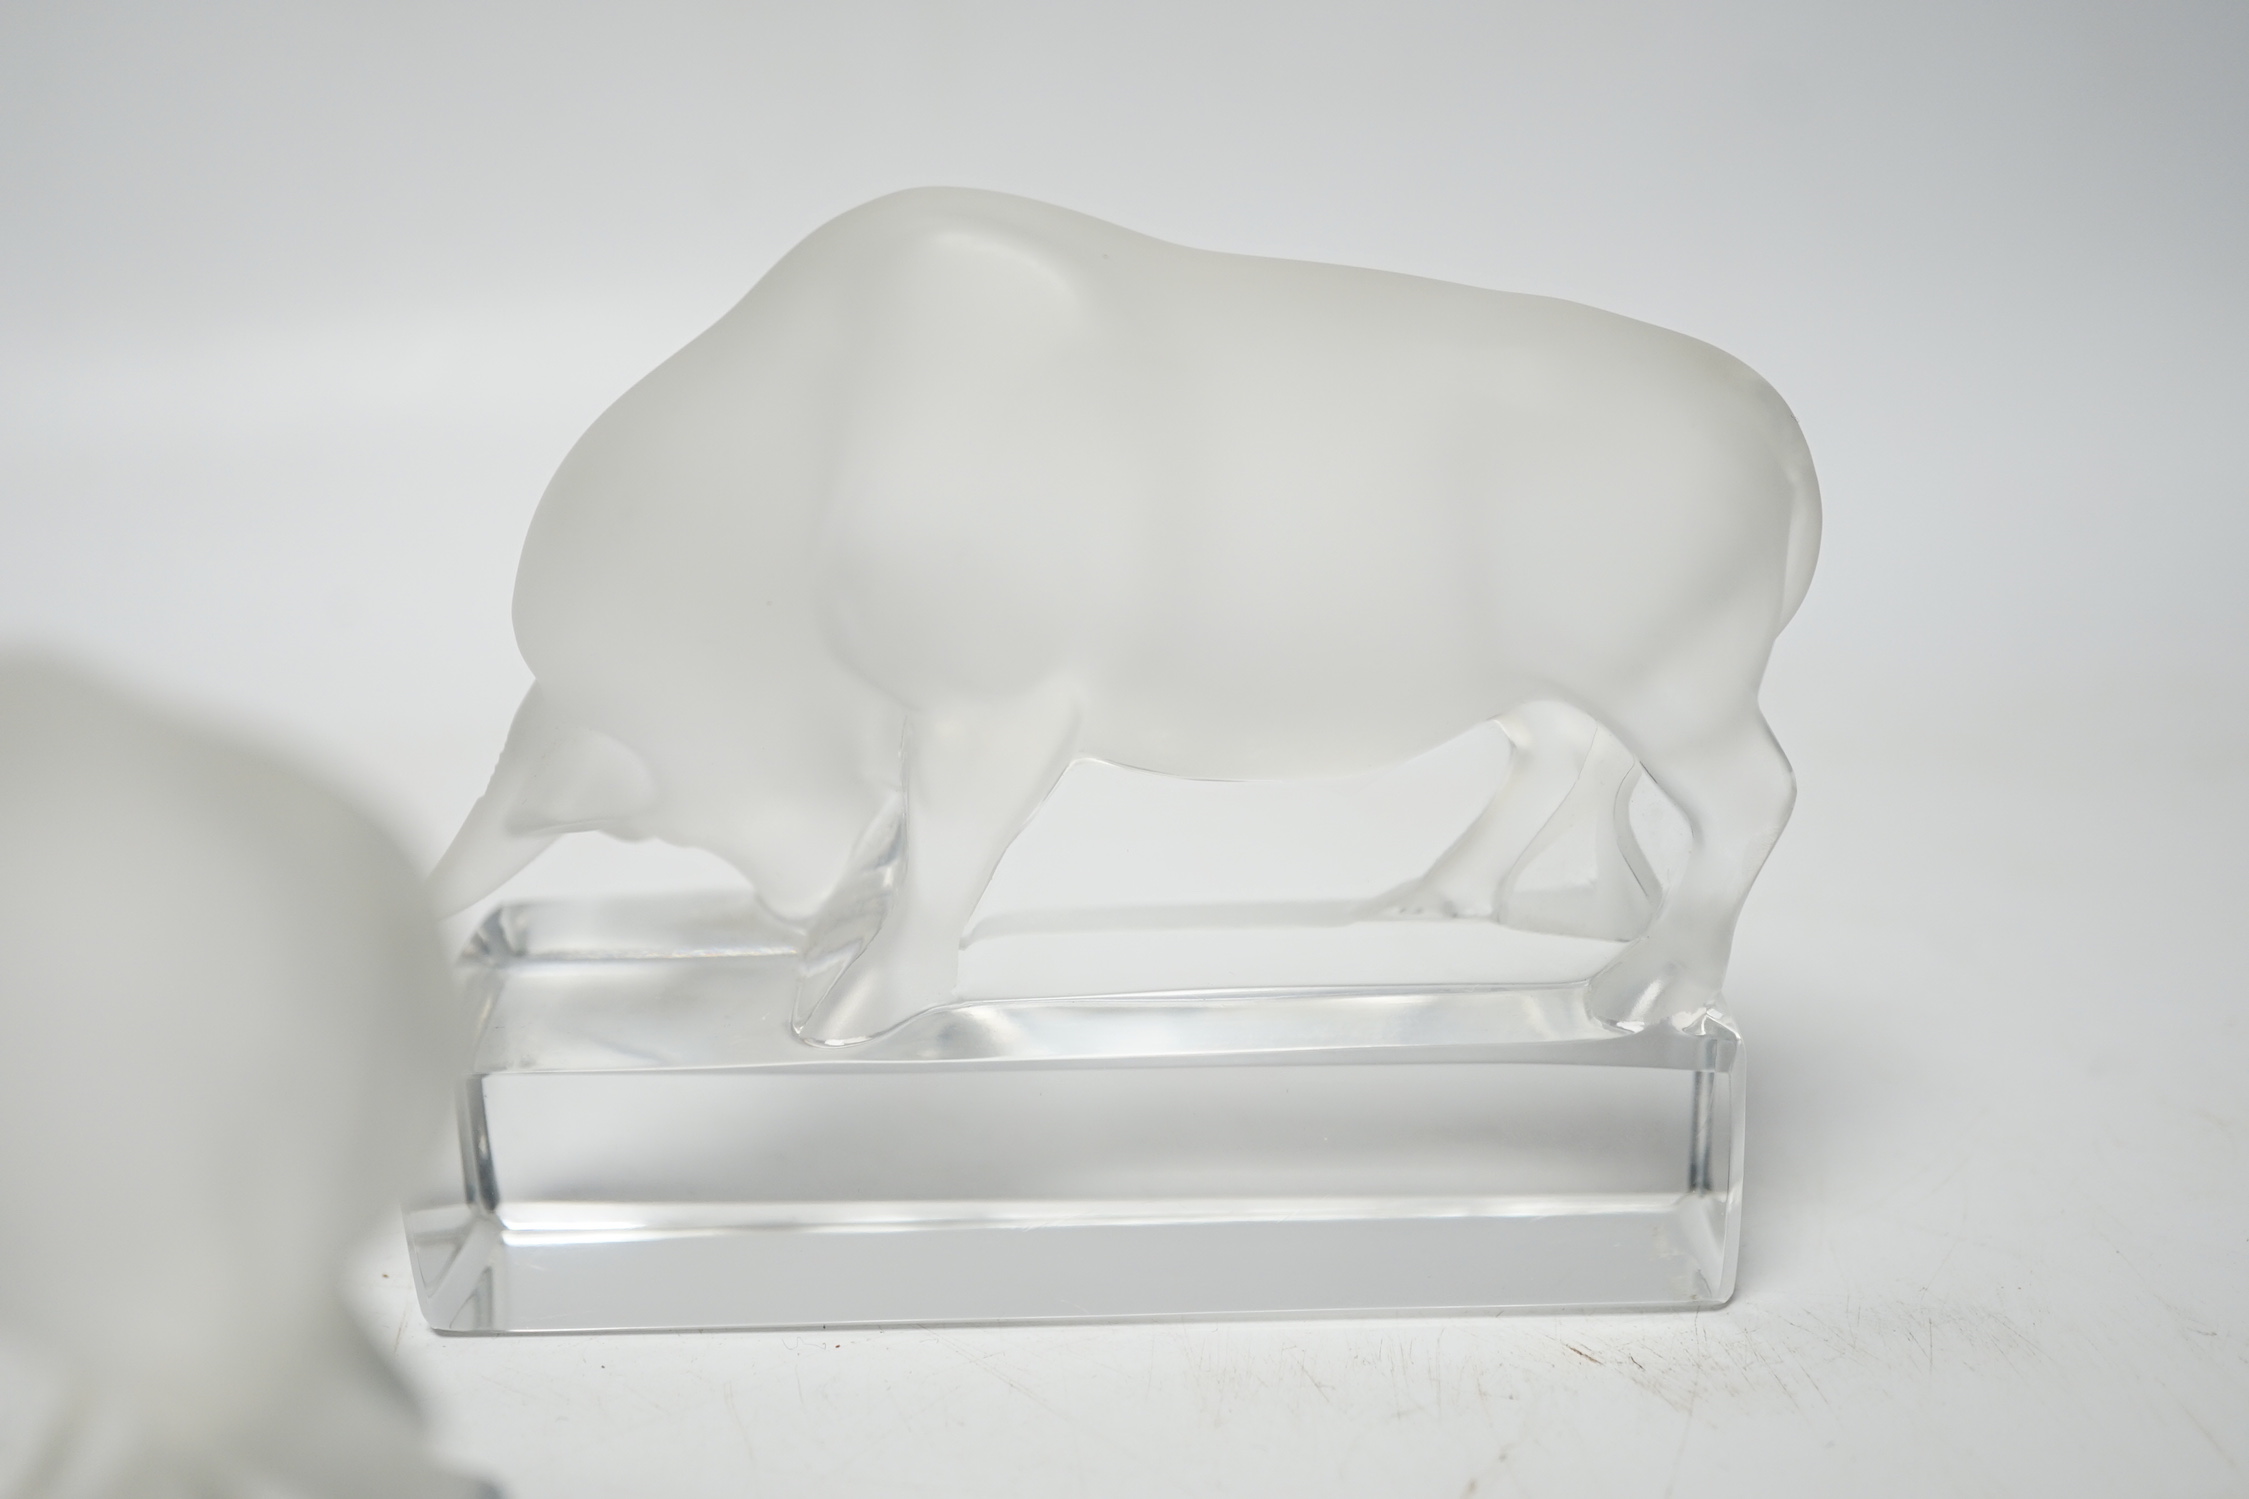 Rene Lalique, two frosted glass paperweights modelled as a bull, signed ‘Lalique France’ to base, 9cm high